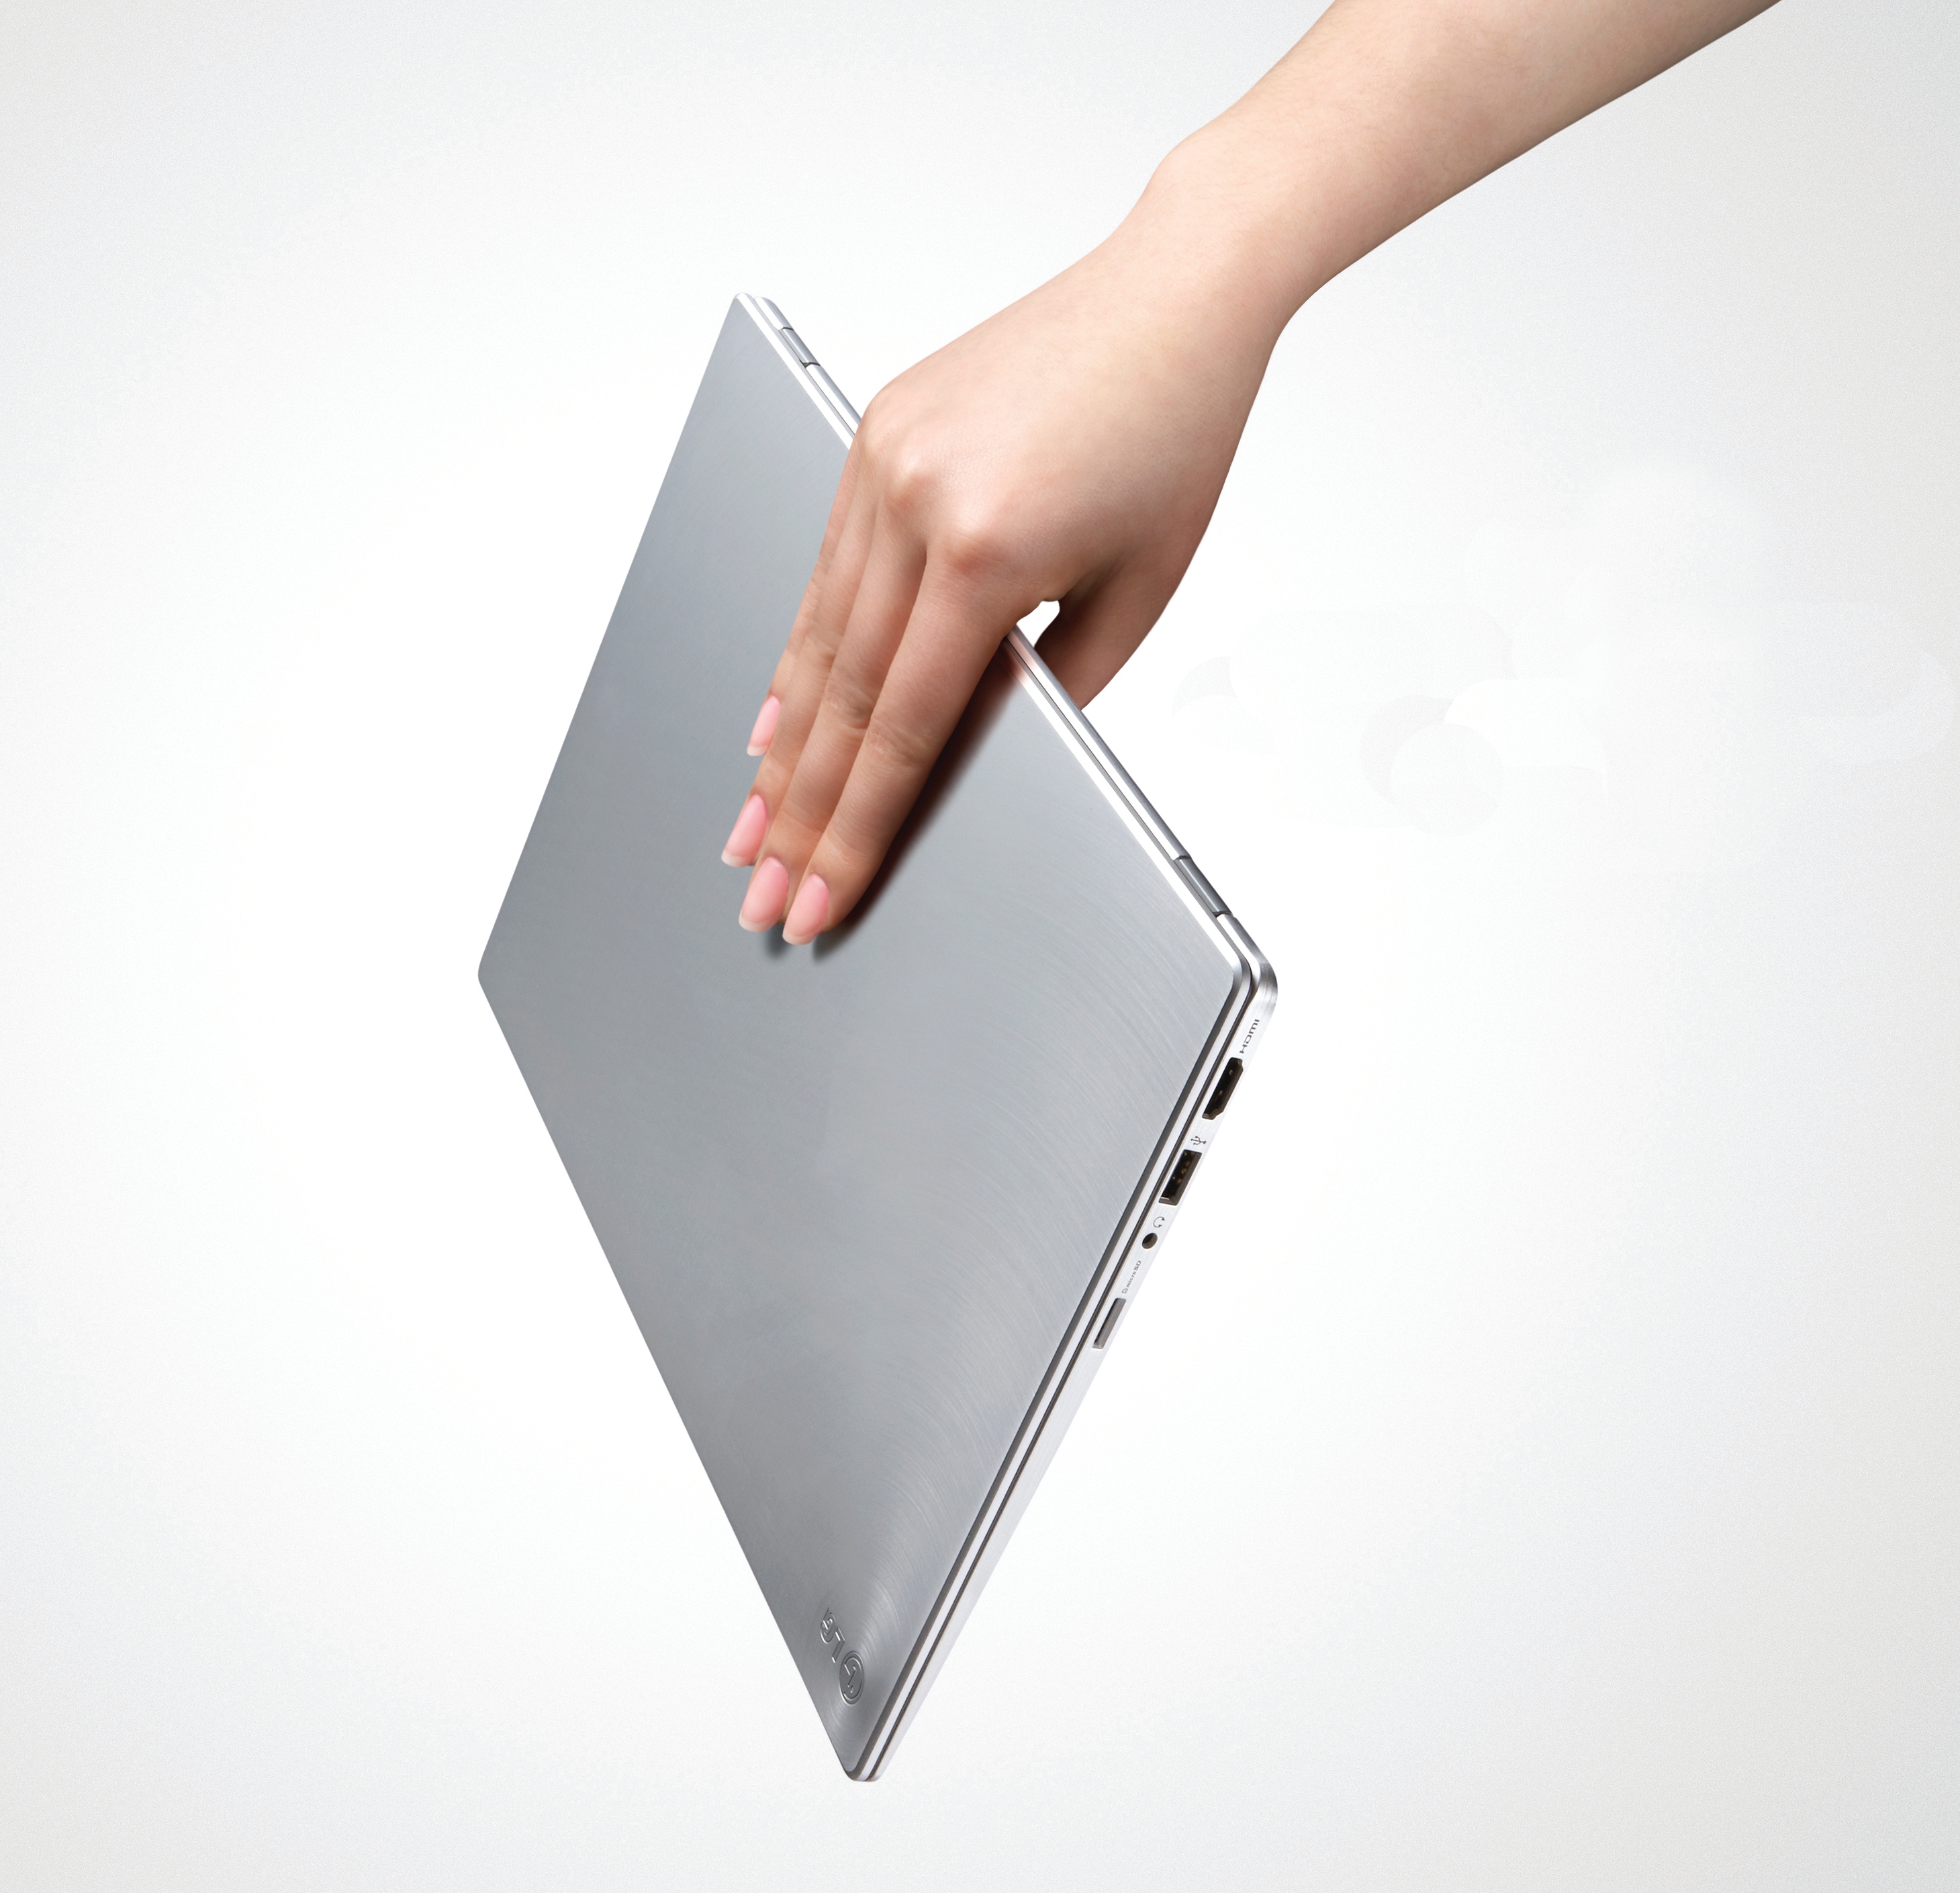 A person effortlessly carries the LG Ultrabook model Z330 with just one hand